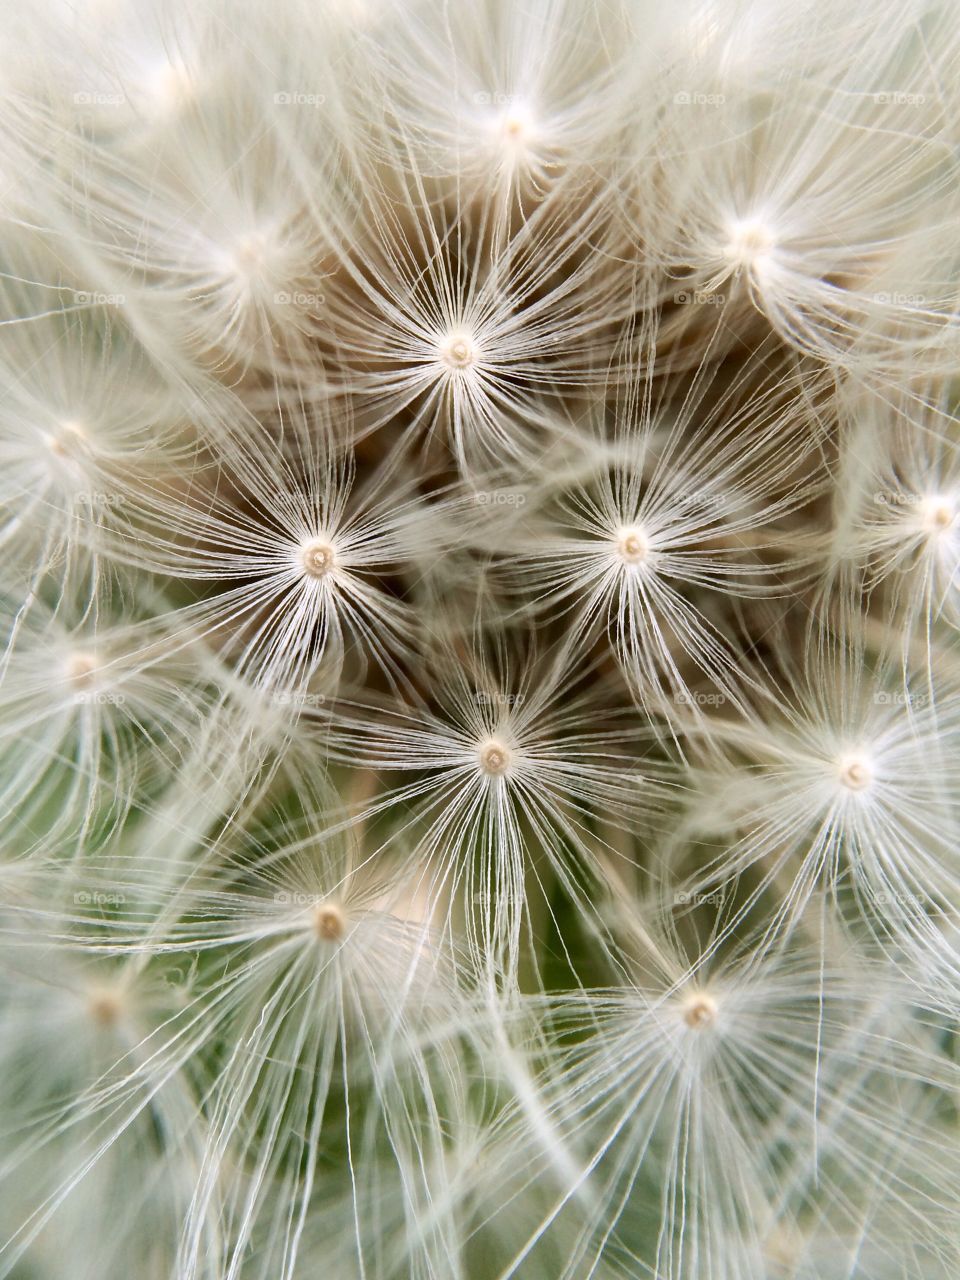 This is a close up of a dandelion clock growing beside a local horse stables .. it was huge .. I love the detail of the seed heads as they sparkle in the sunshine .. they look like tiny pearls ...